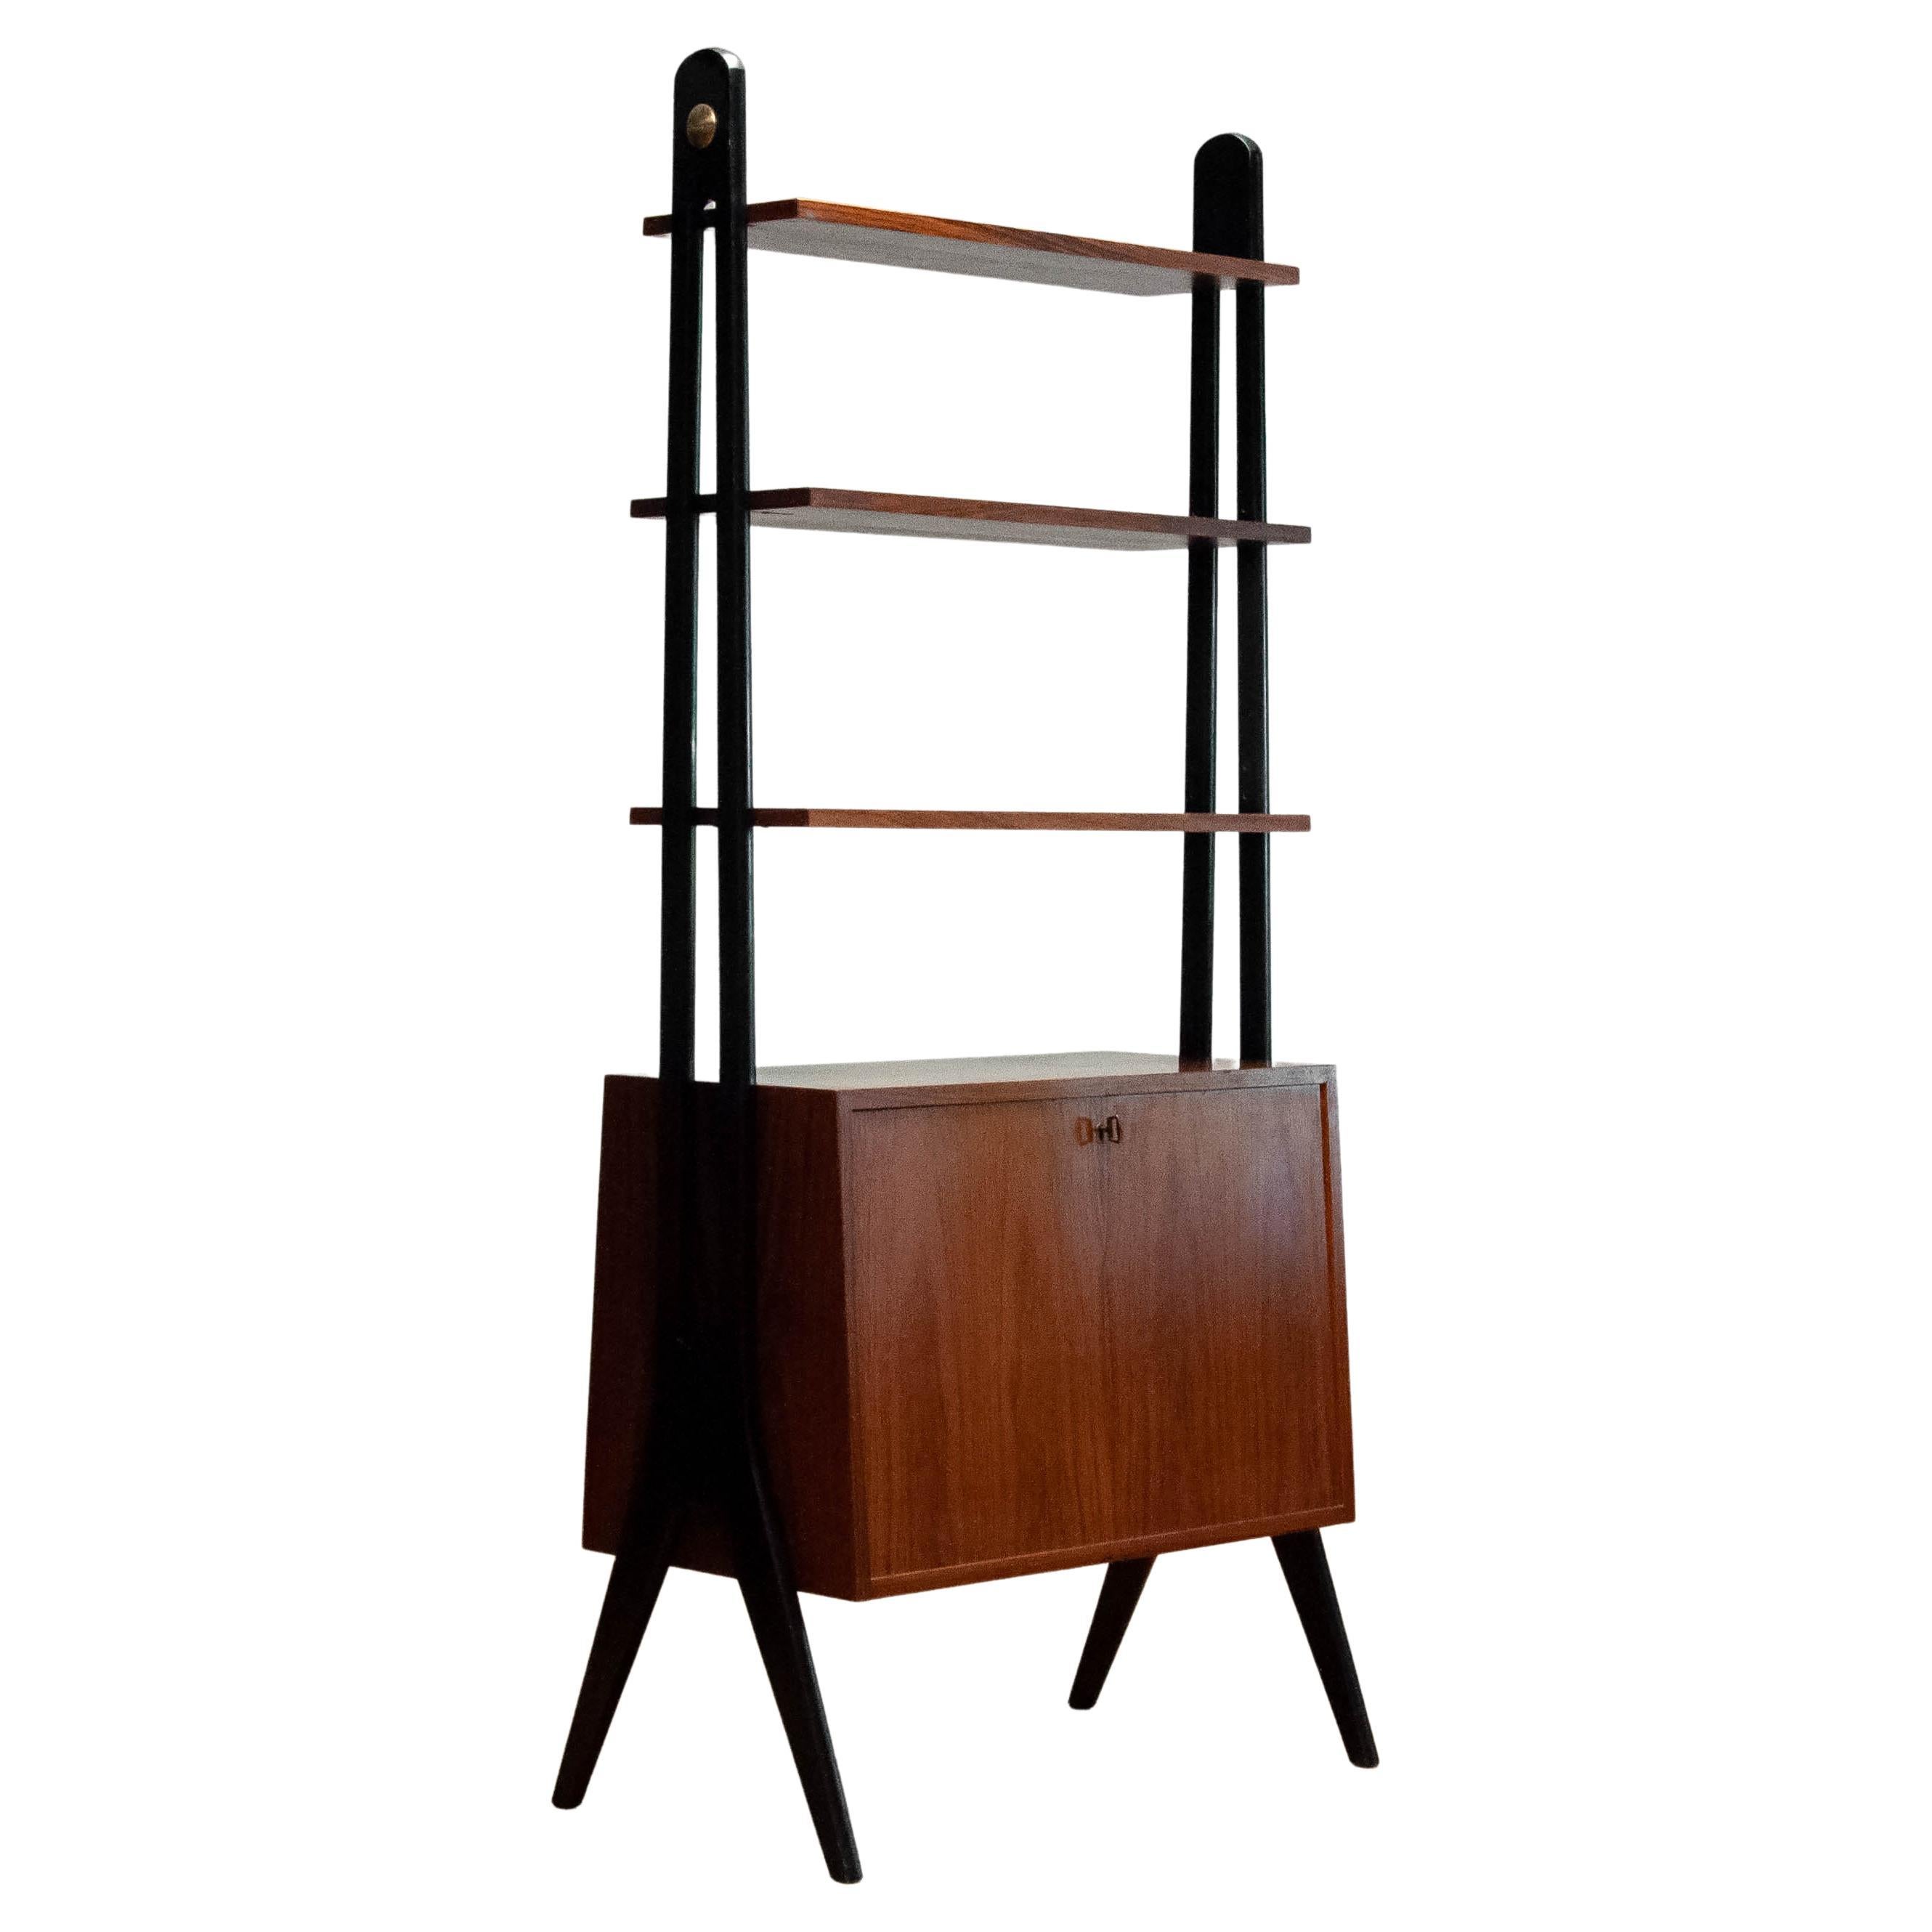 1950 Rosewood Bookcase Room Divider With Black Lacquered Stands By Treman Sweden